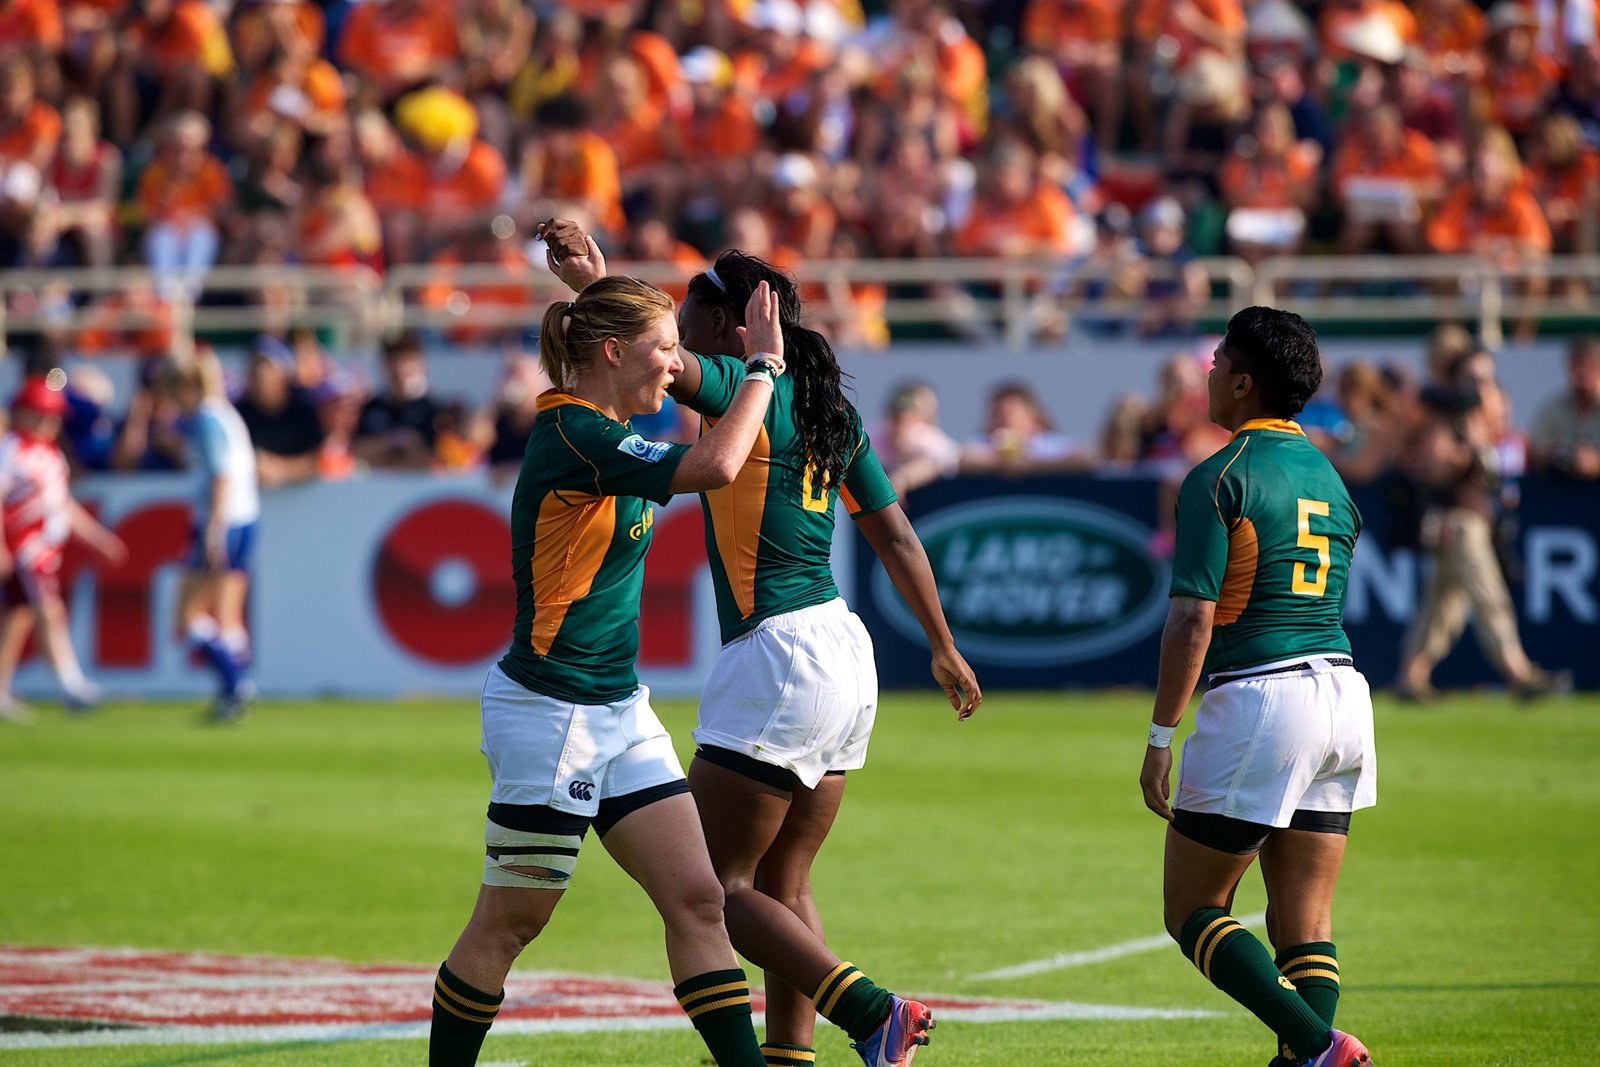 Anticipation heats up for SA team ahead of Women’s Rugby World Cup - Sports Leo